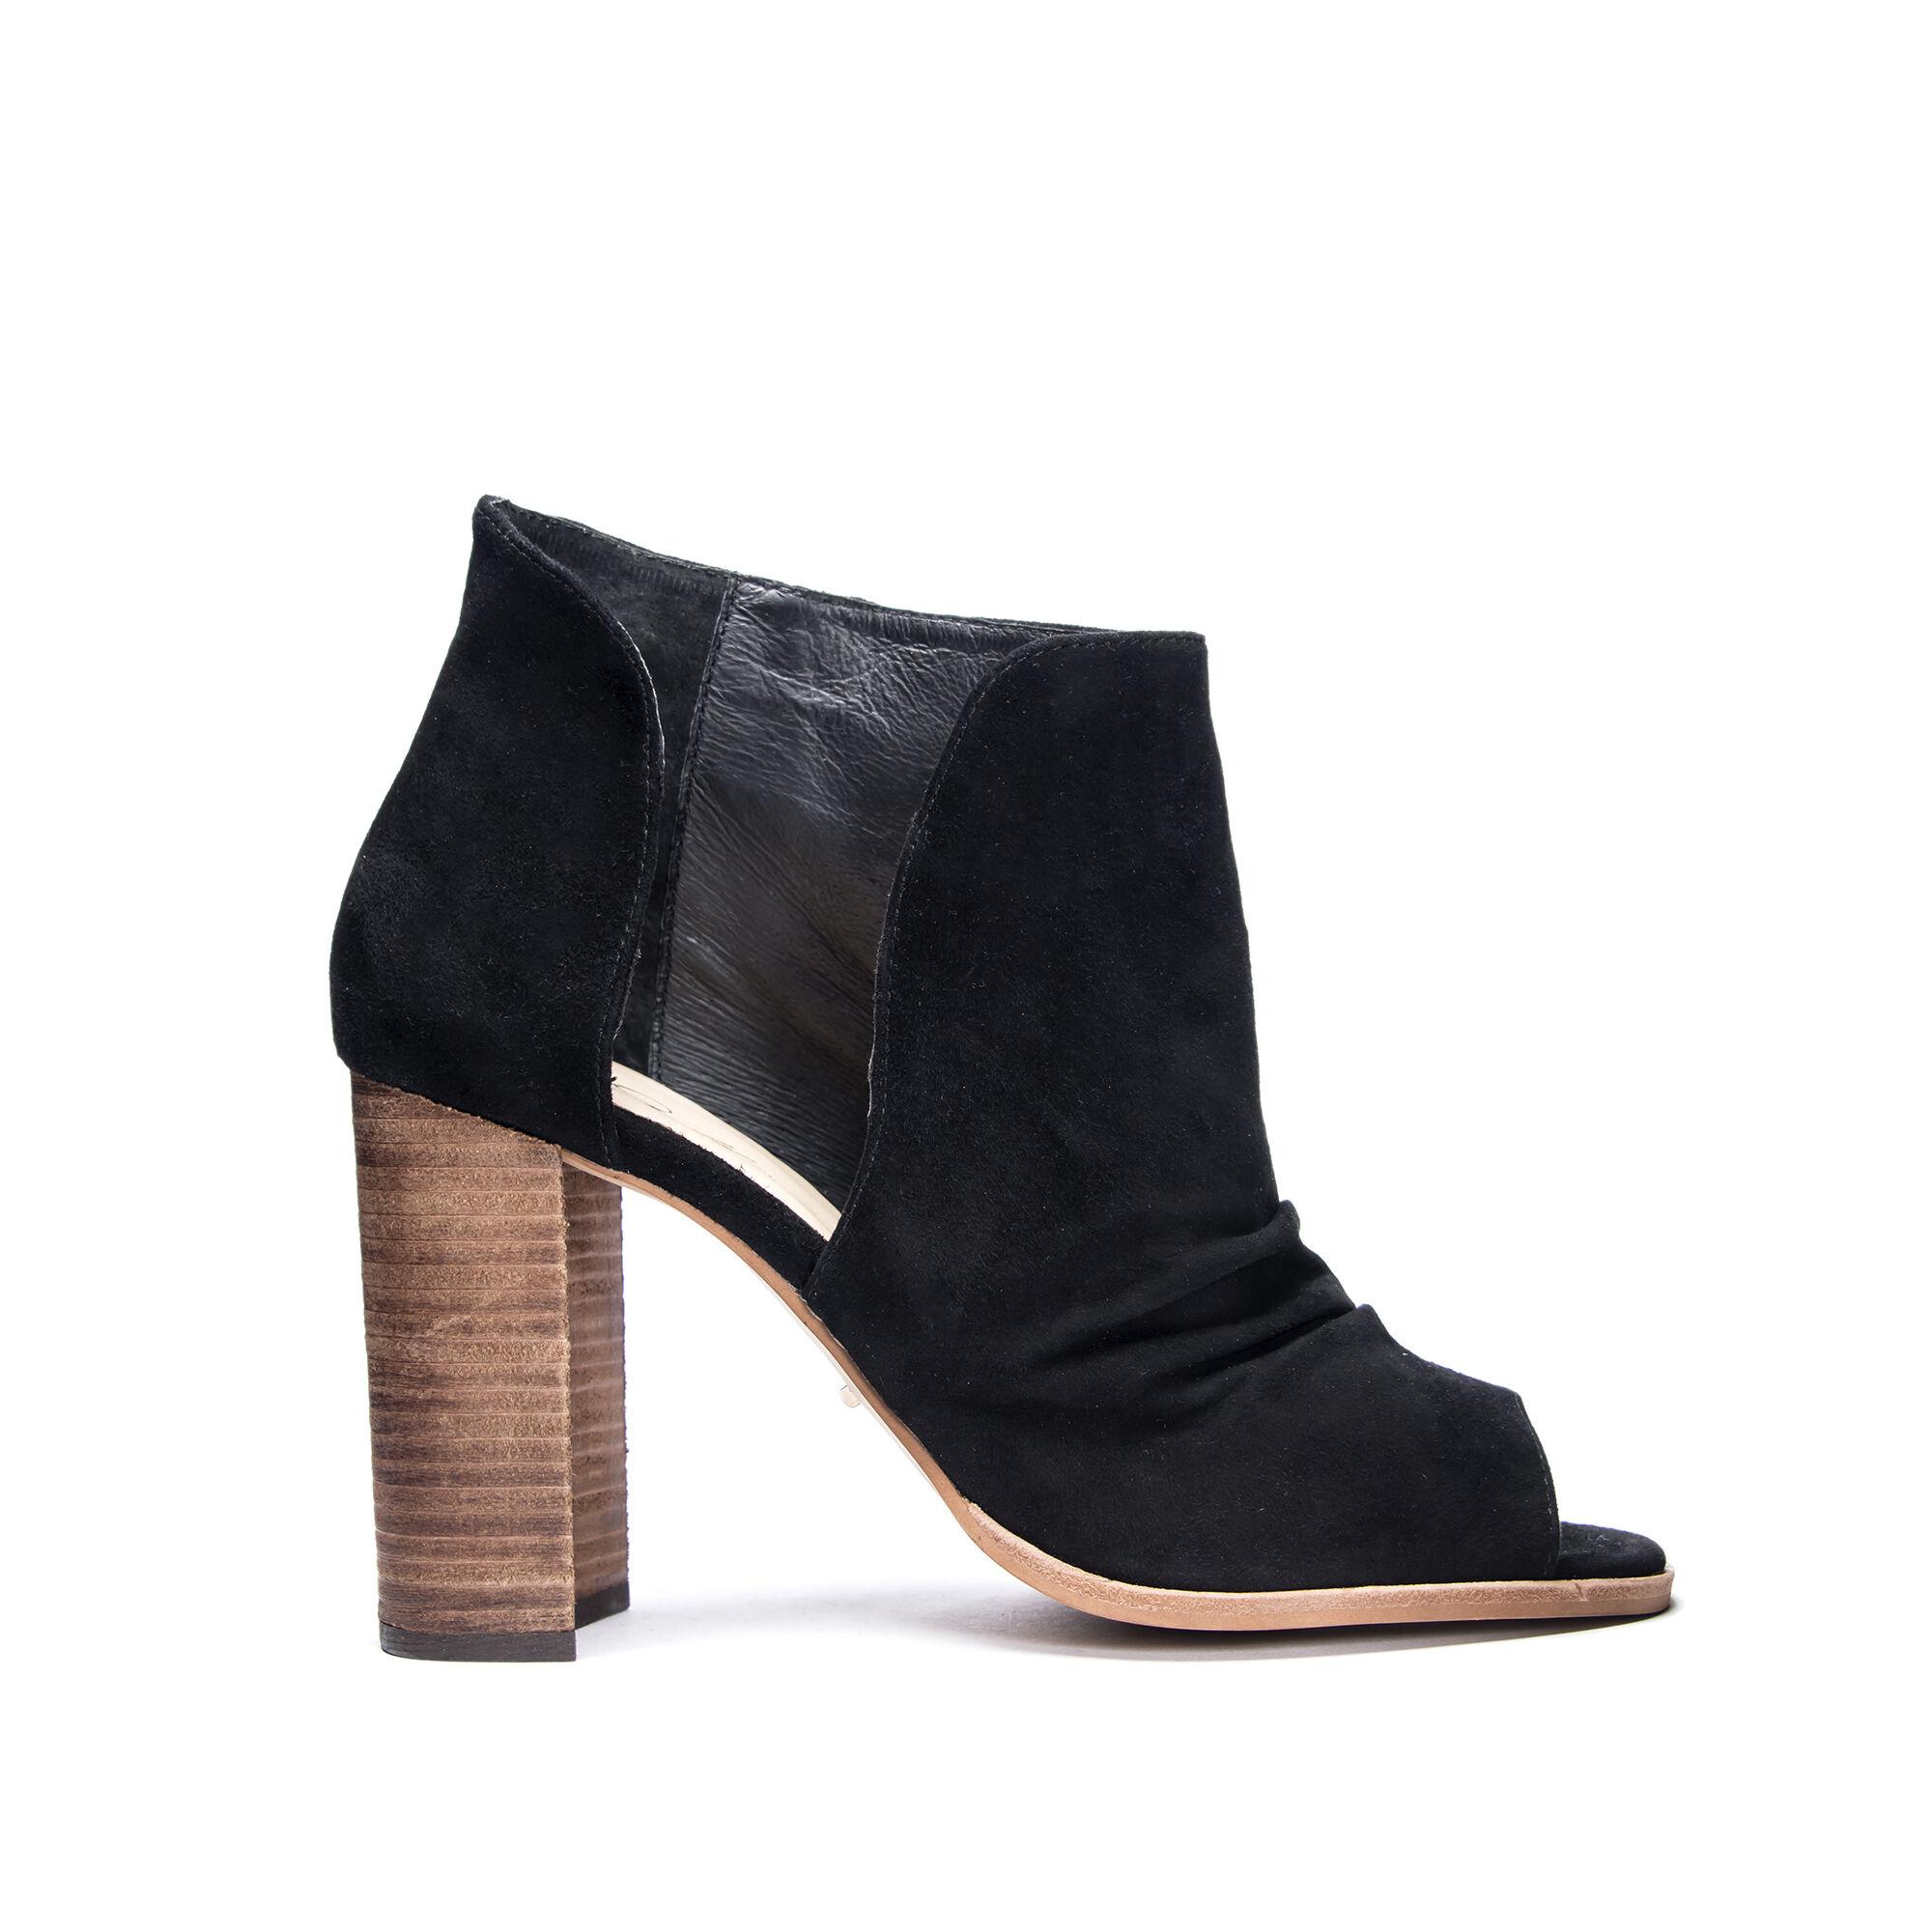 Chinese Laundry Suede Loyalty Peep Toe Bootie in Black - Lyst